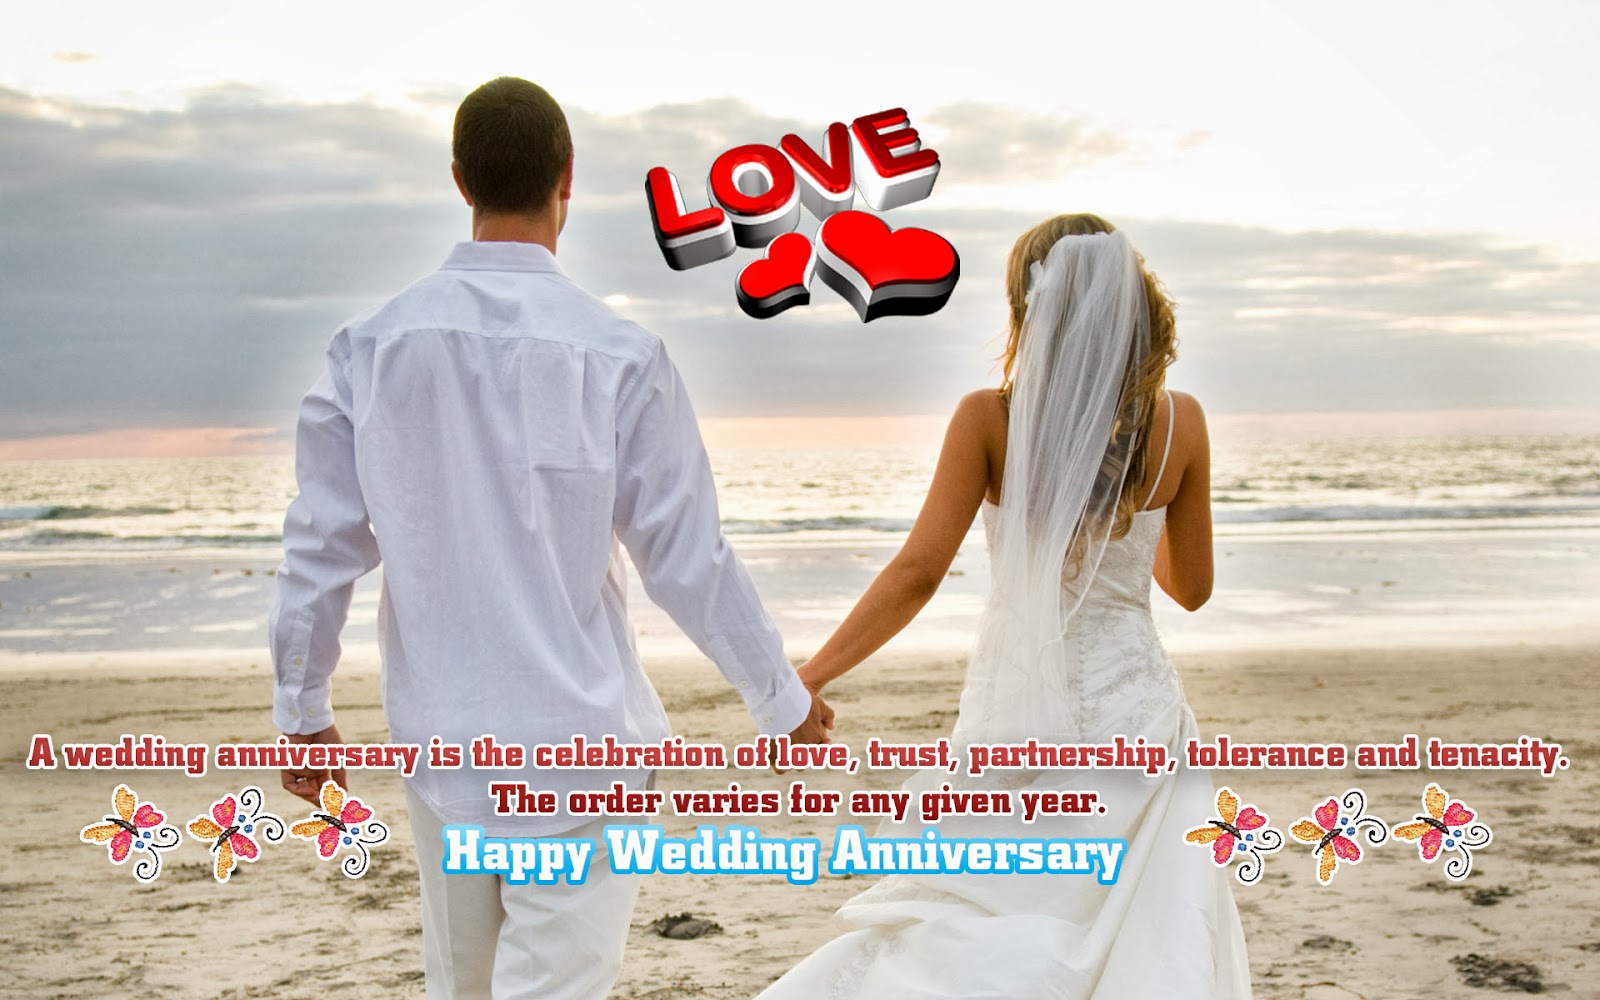 Best Happy Wedding Anniversary Images, Messages, Quotes, Greetings Cards